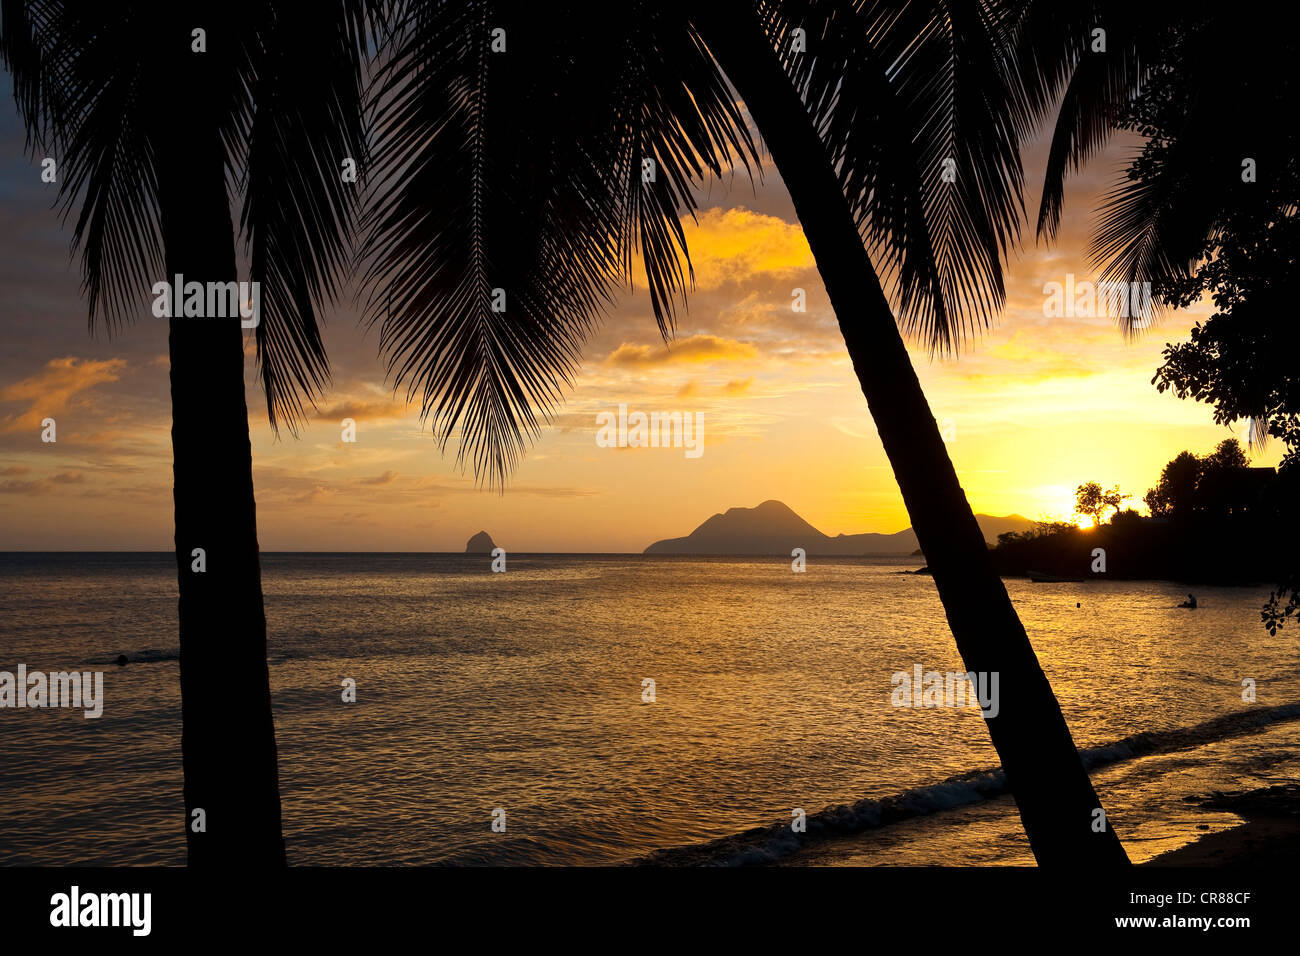 France, Martinique (French West Indies), Anse Figuier, and Diamond Rock in the background, the beach at sunset Stock Photo